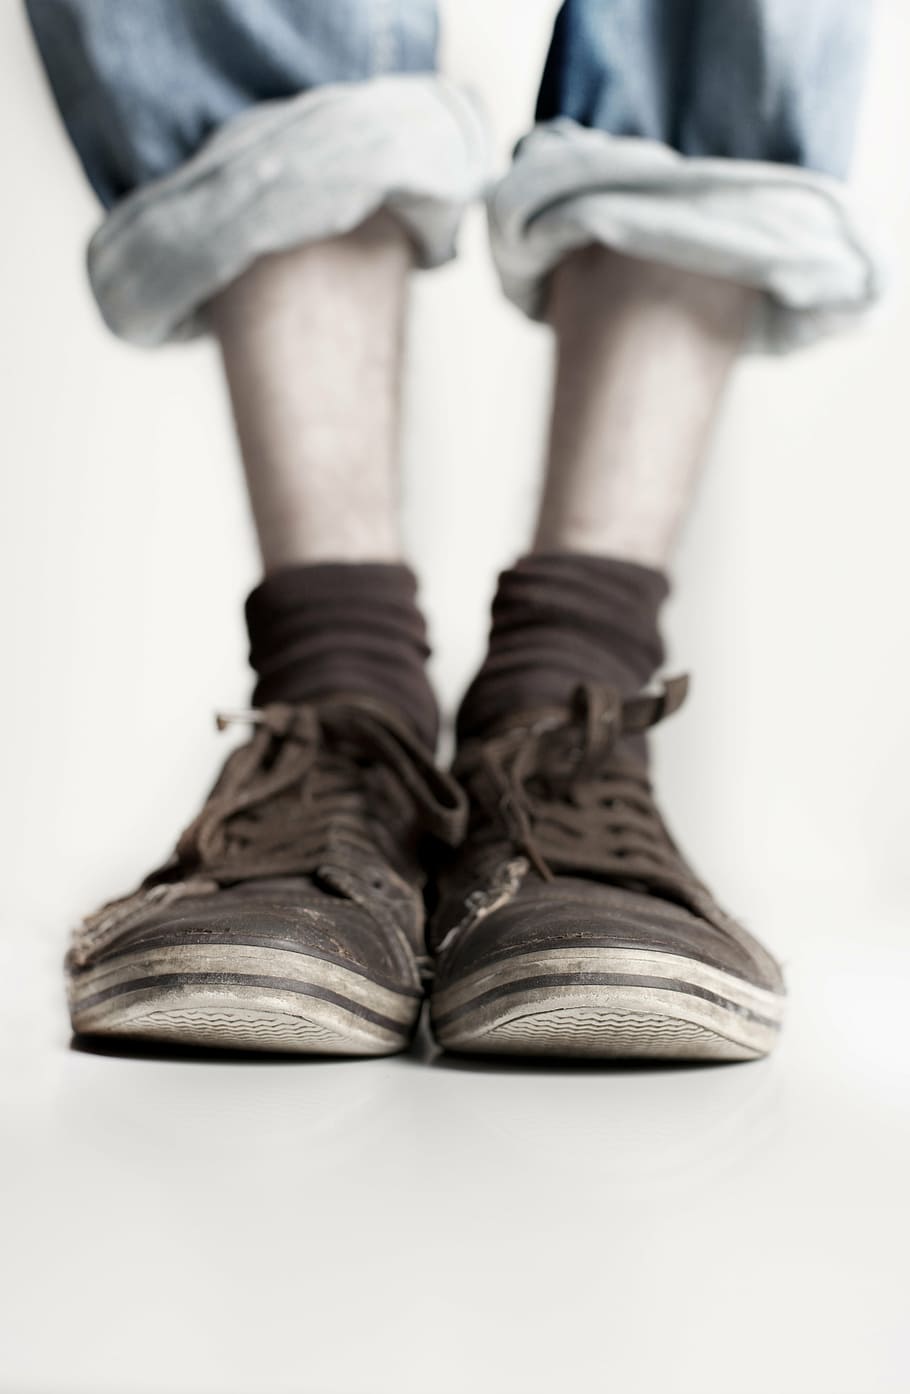 person wearing brown shoes in tilt shift photography, legs, feet